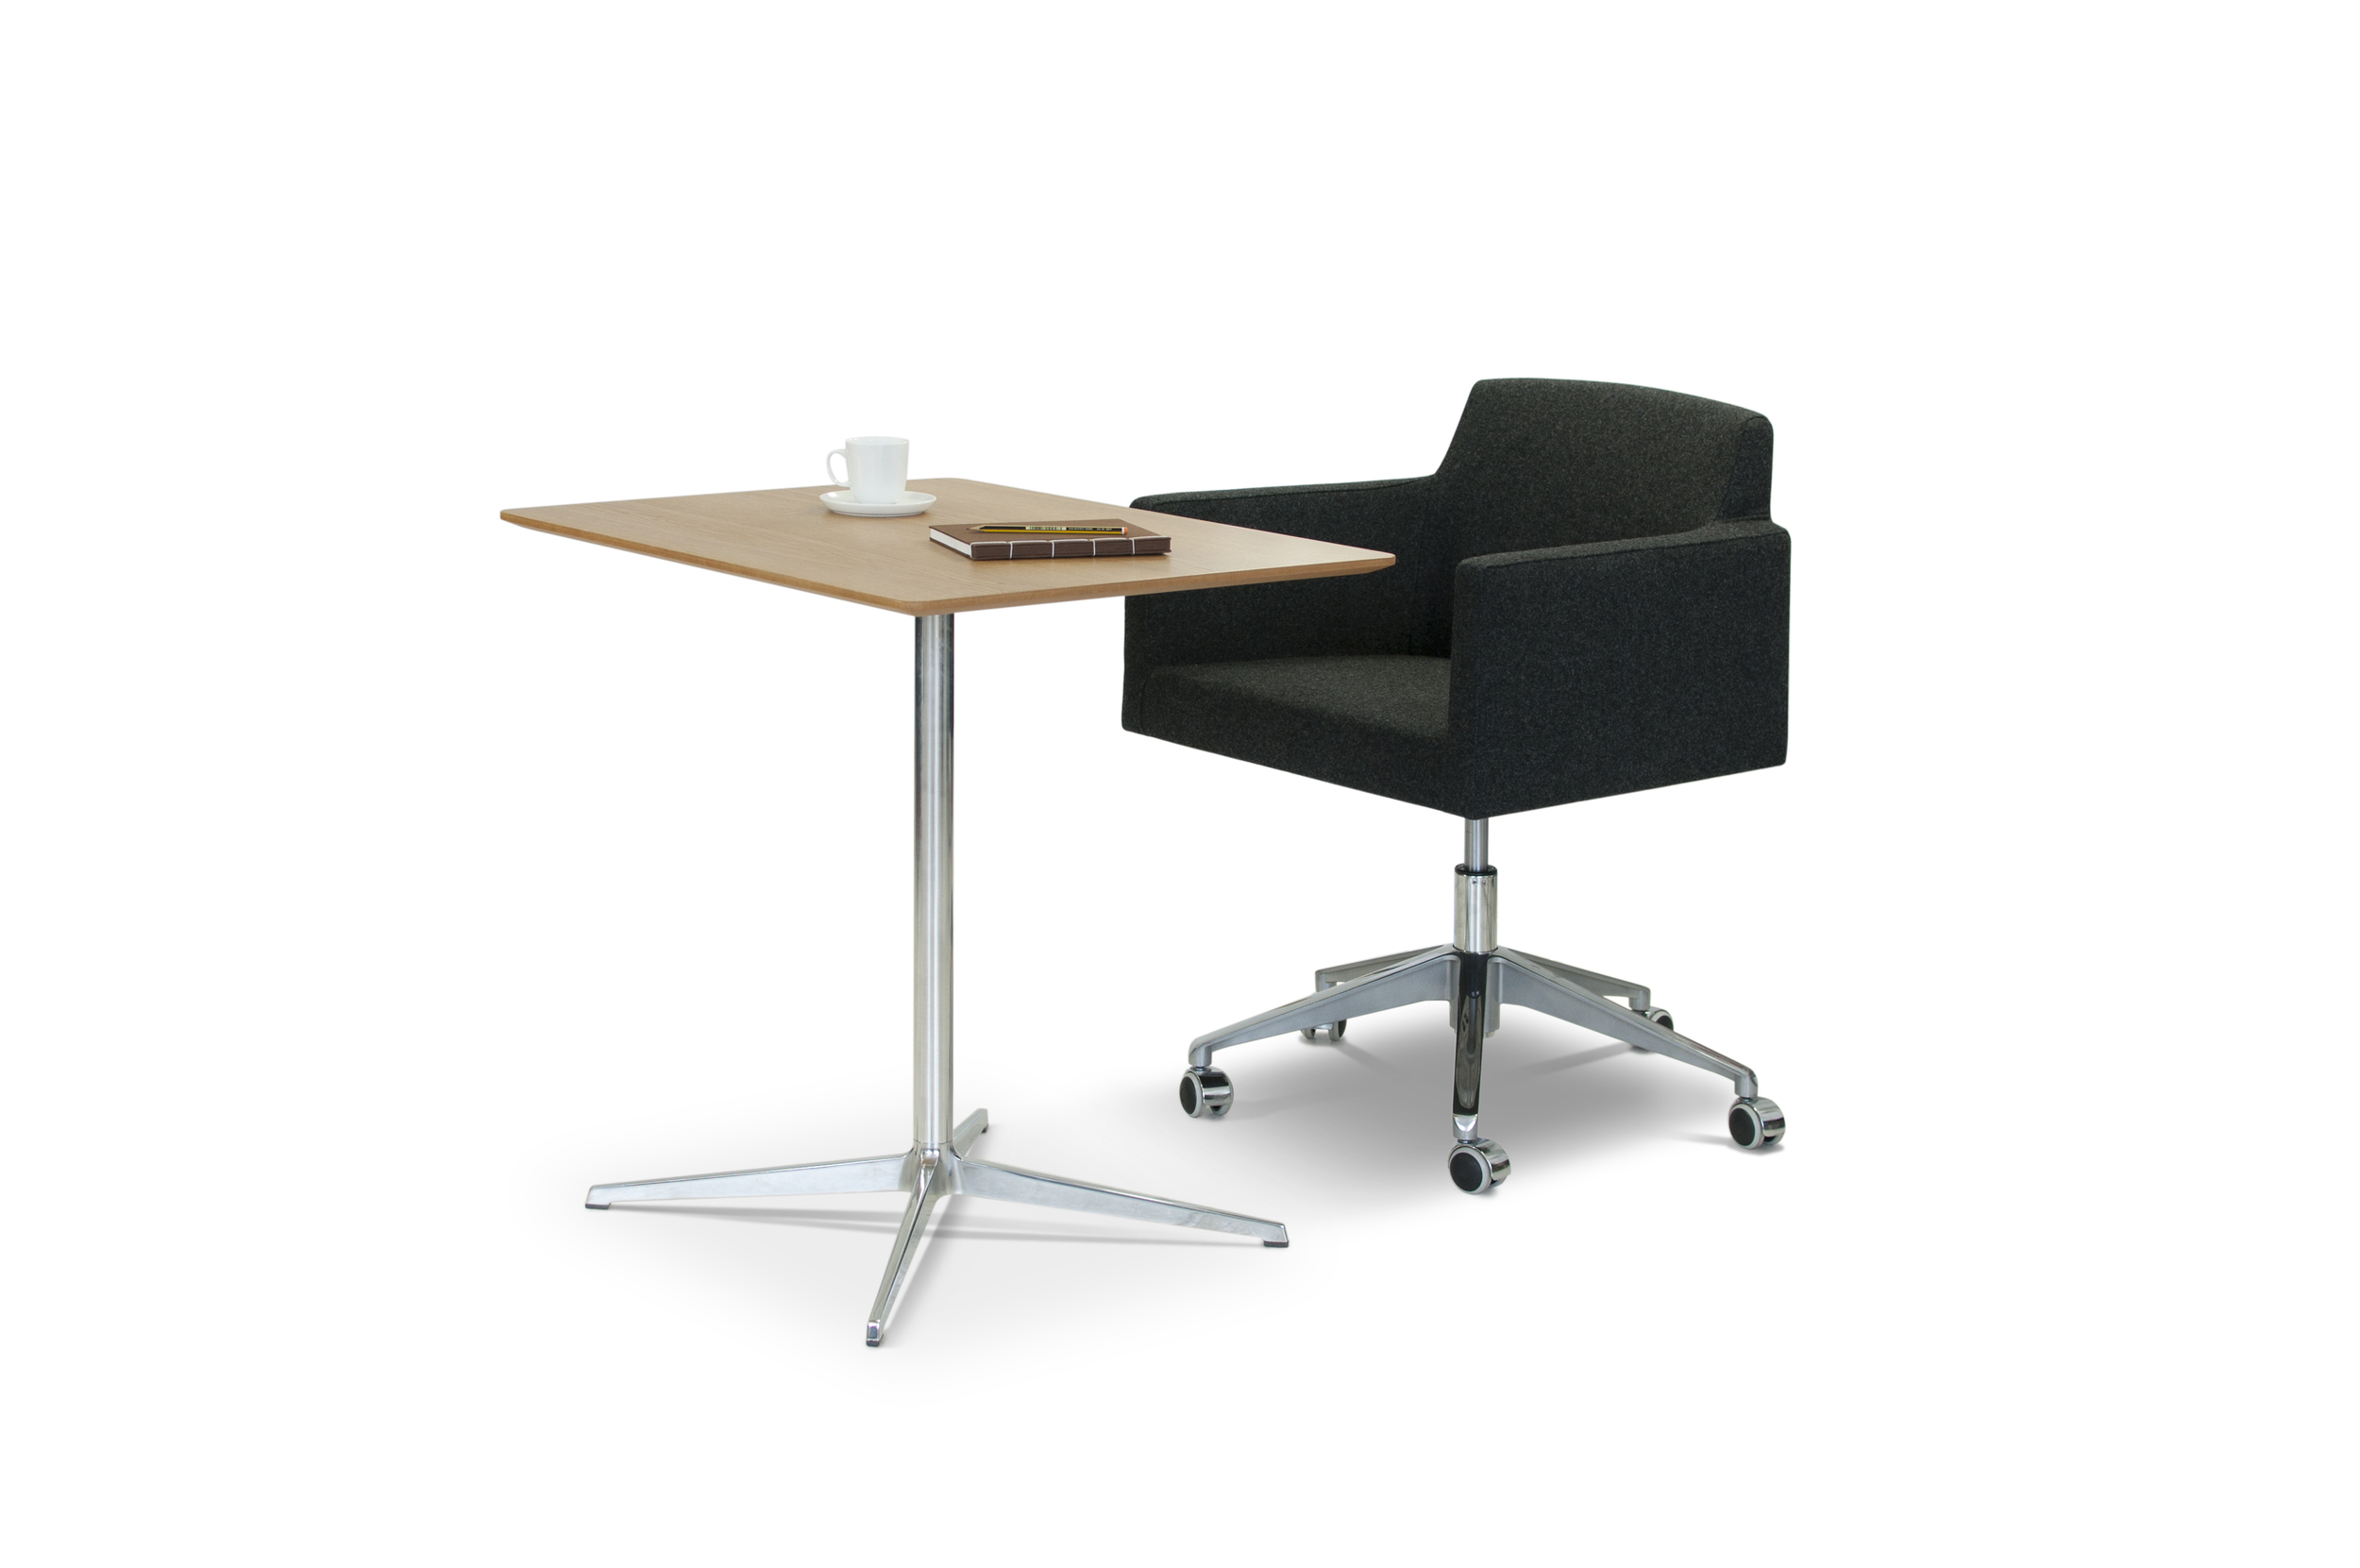 hm23 on swivel base with casters and hm57f table.jpg